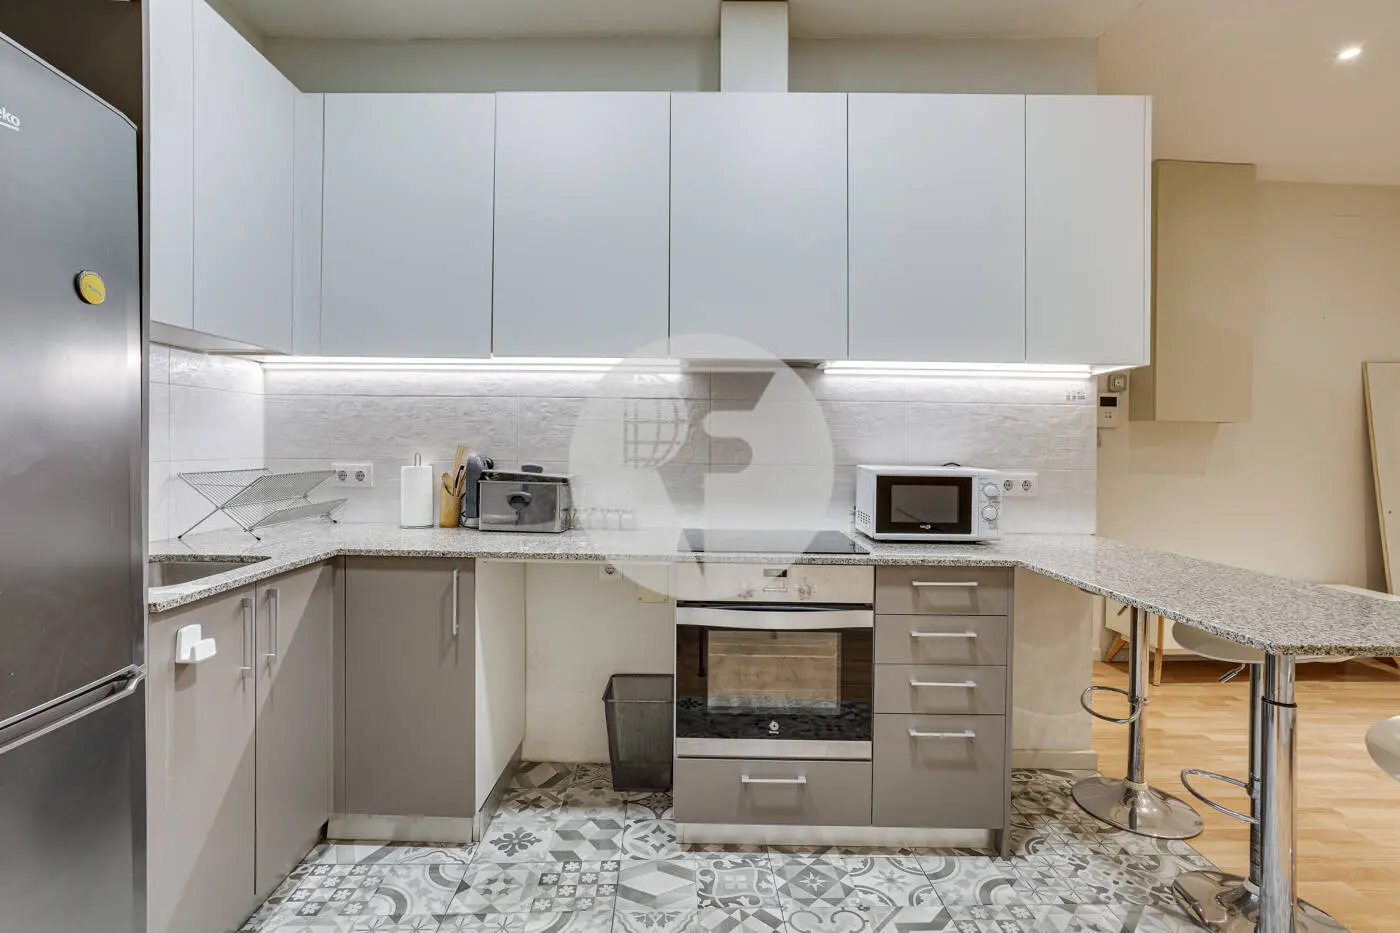 Magnificent apartment for sale next to Pl Universitat of 114m2 according to the land registry, located on Tallers Street in the Ciutat Vella neighborhood of Barcelona 4